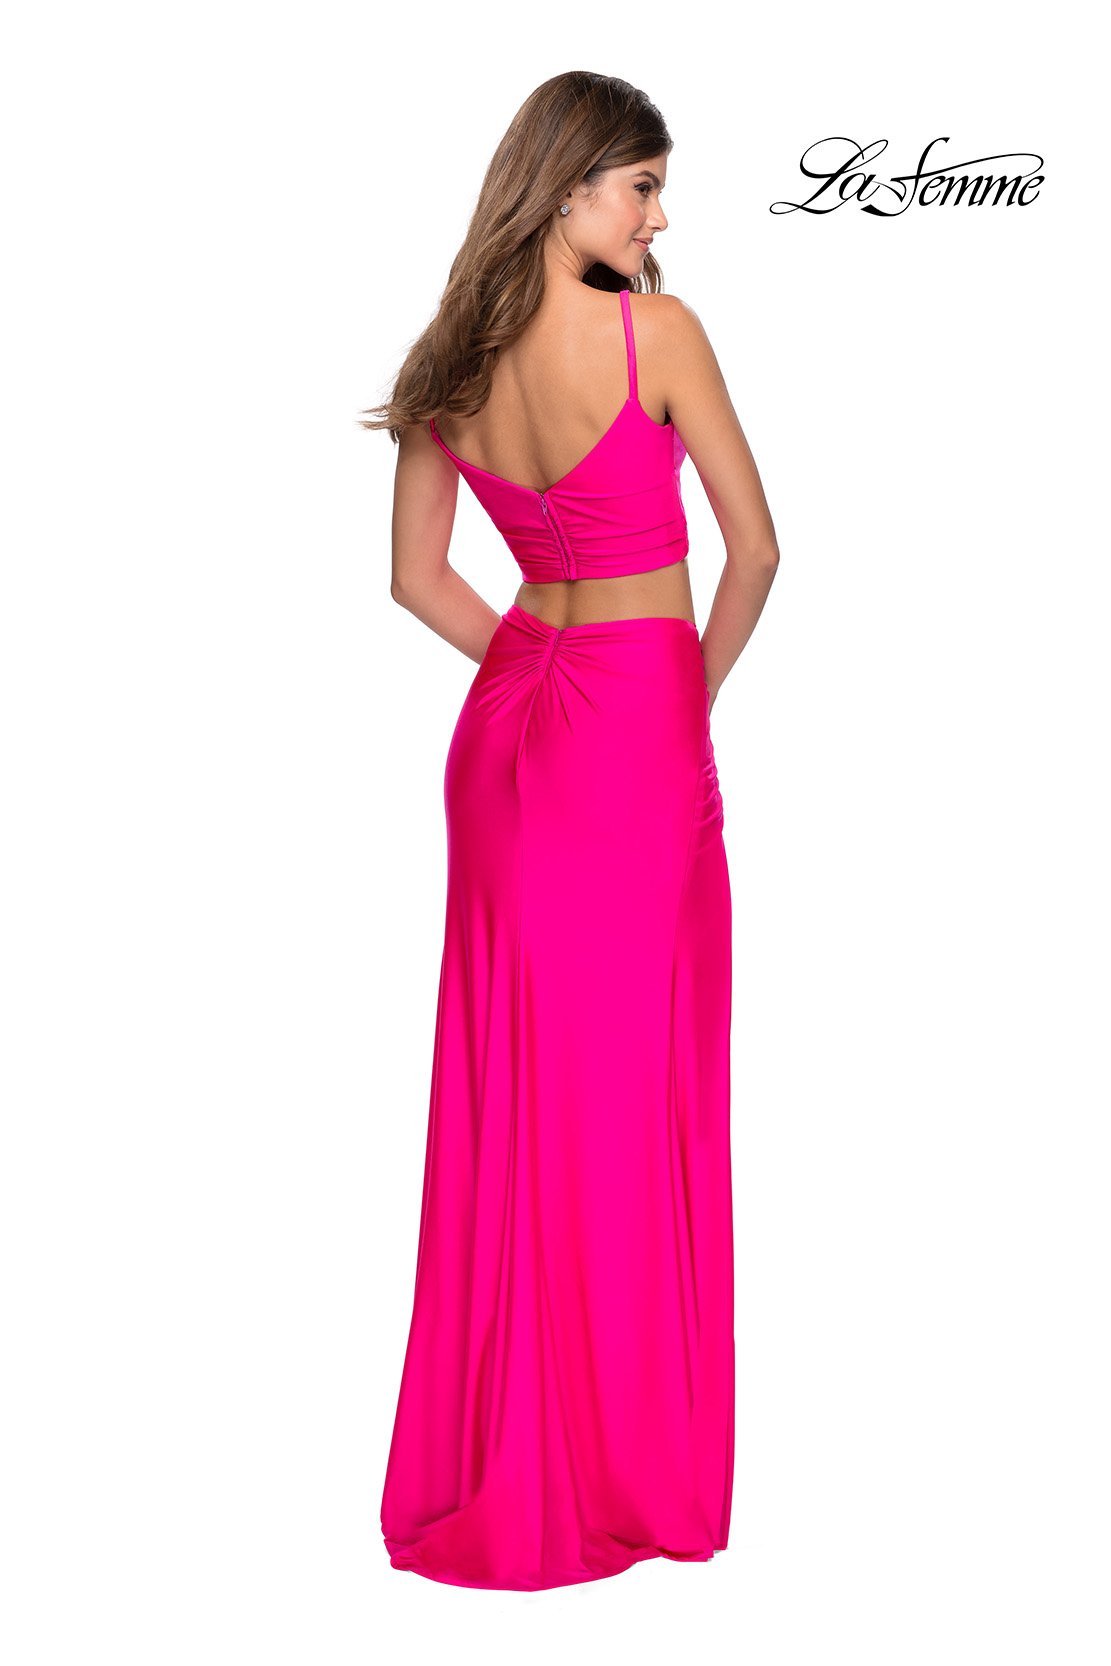 La Femme 28472 dress images in these colors: Neon Green, Neon Pink, Neon Yellow, Royal Blue.